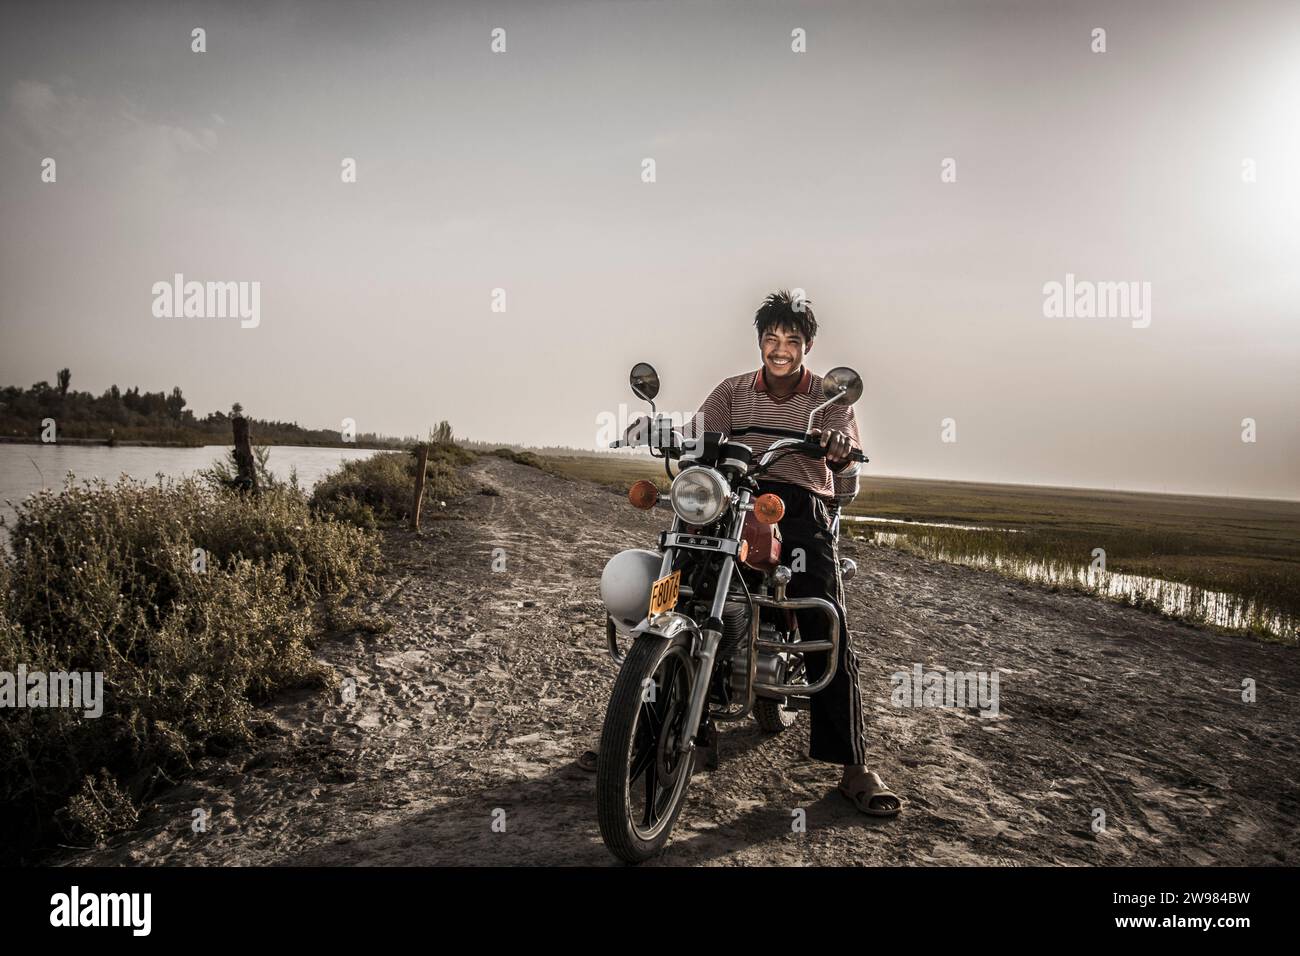 Central Asian man with his motorcycle Stock Photo